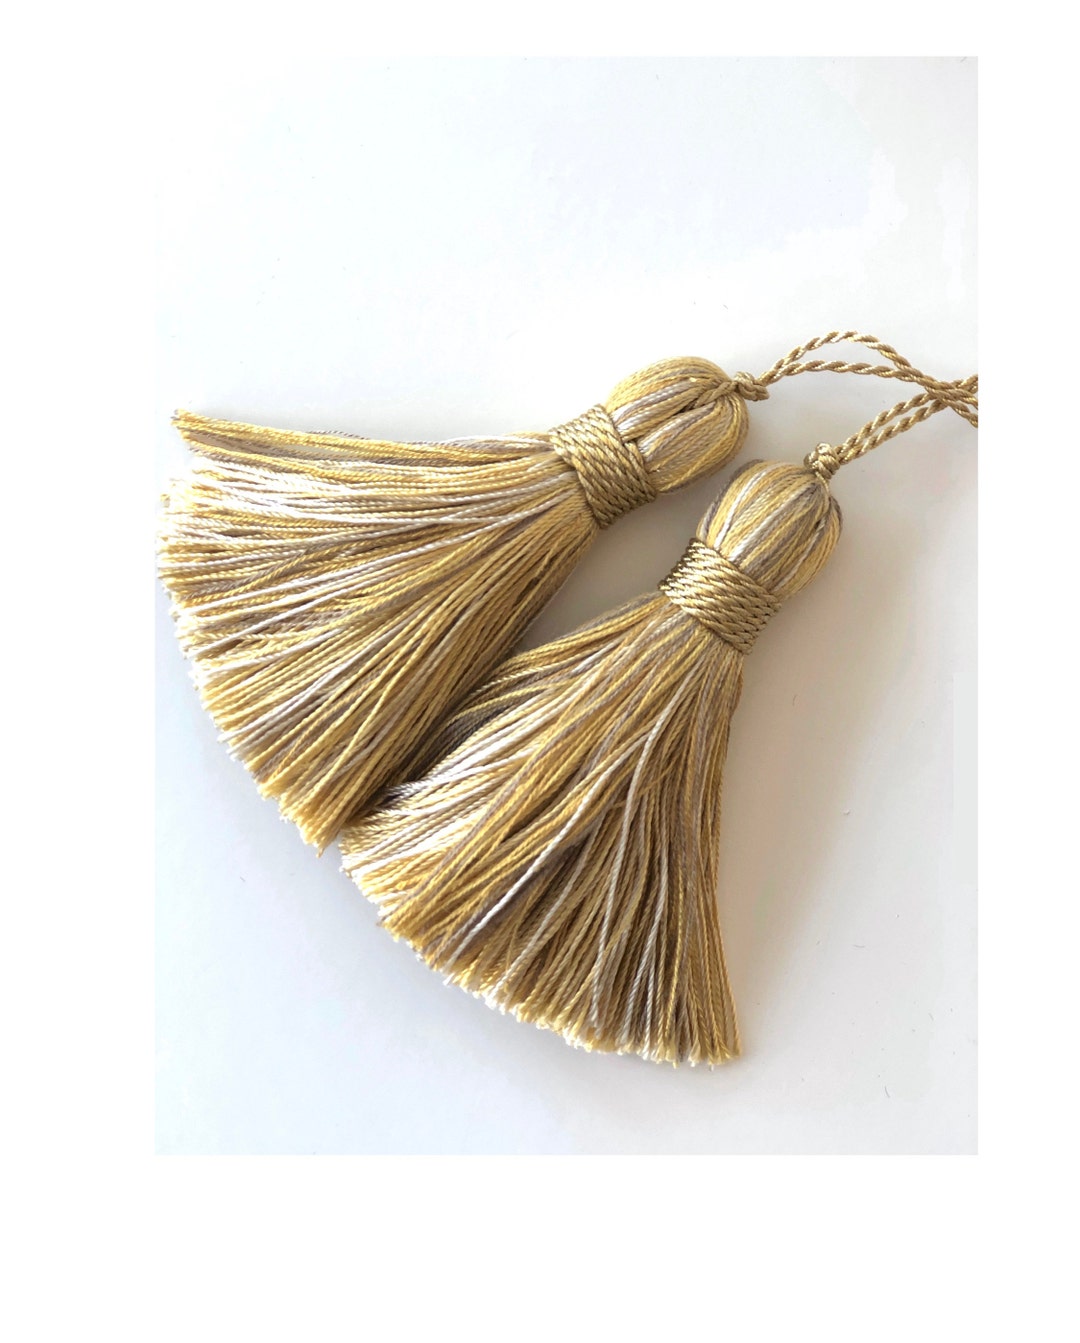 Pair of Gold Decorative Tassels FREE SHIPPING 